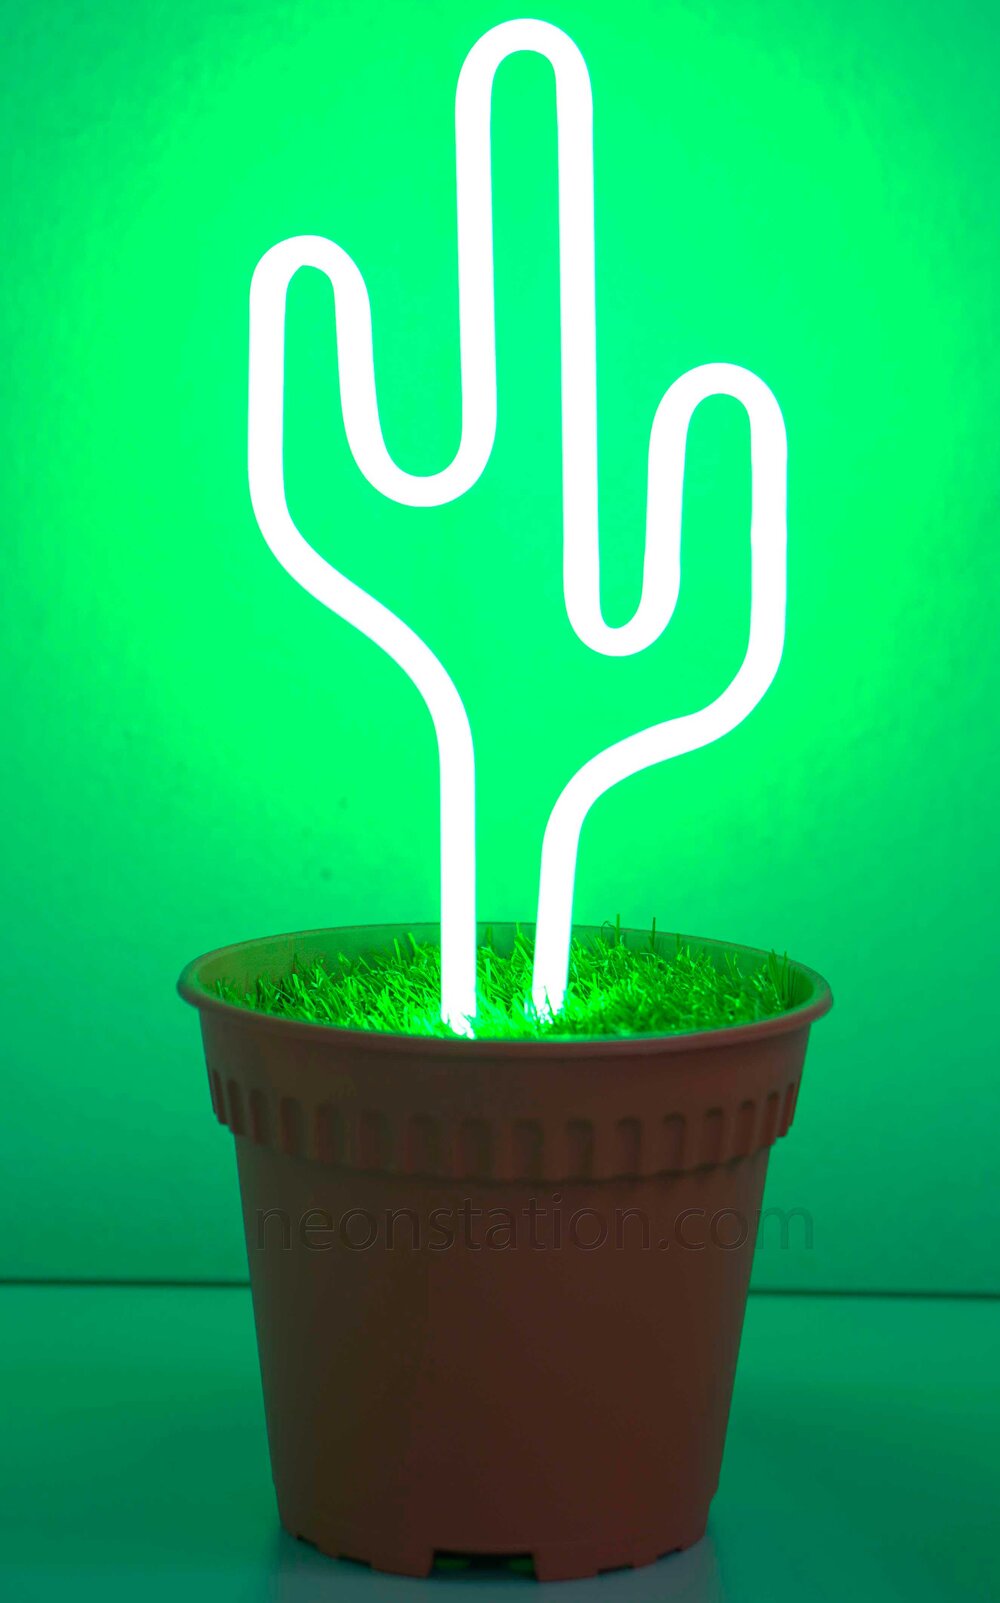 Potted Plant Cactus Neon Sign For Sale Neonstation